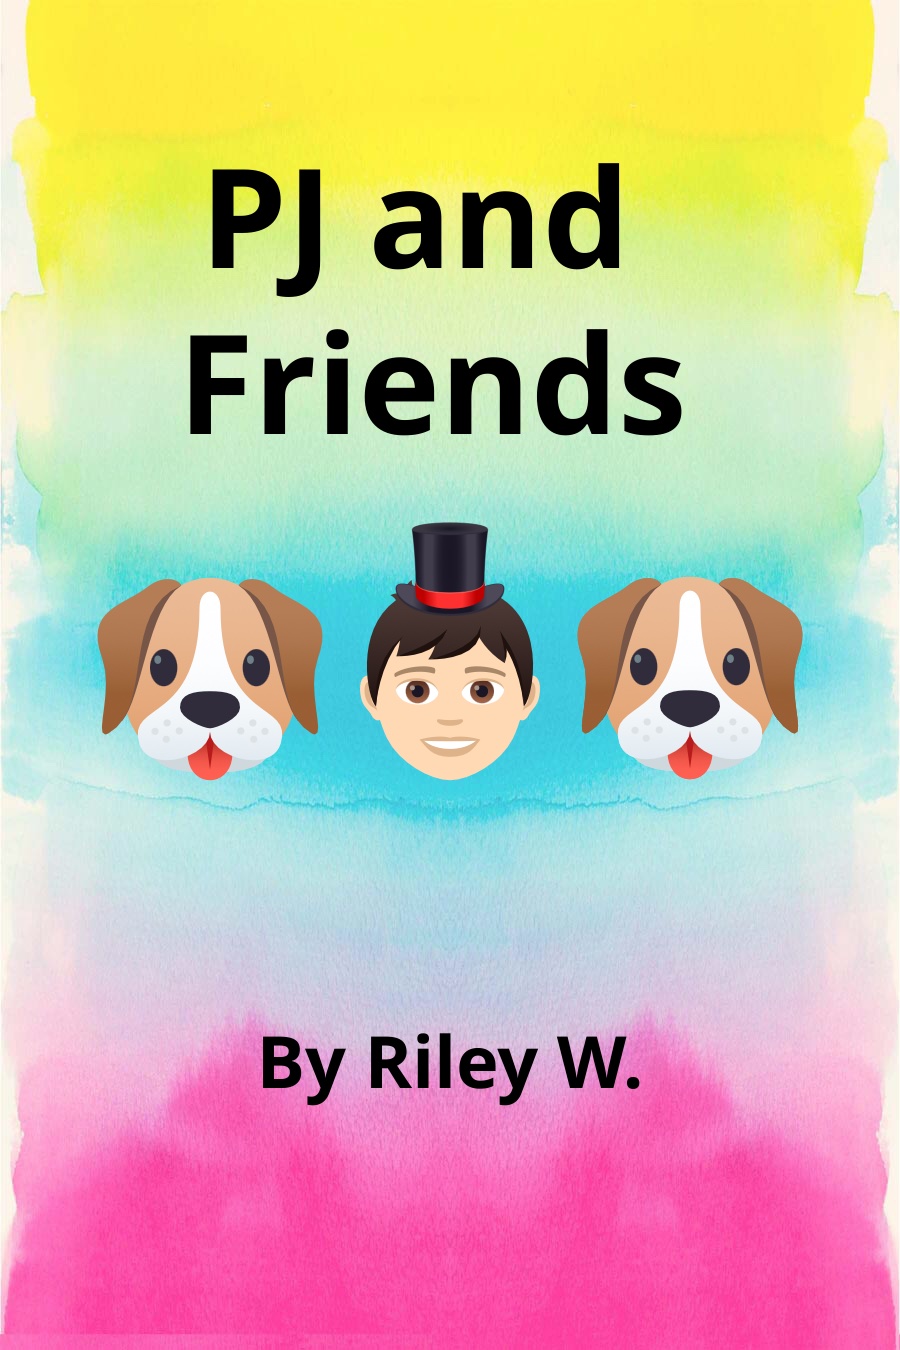 PJ and Friends by Riley W